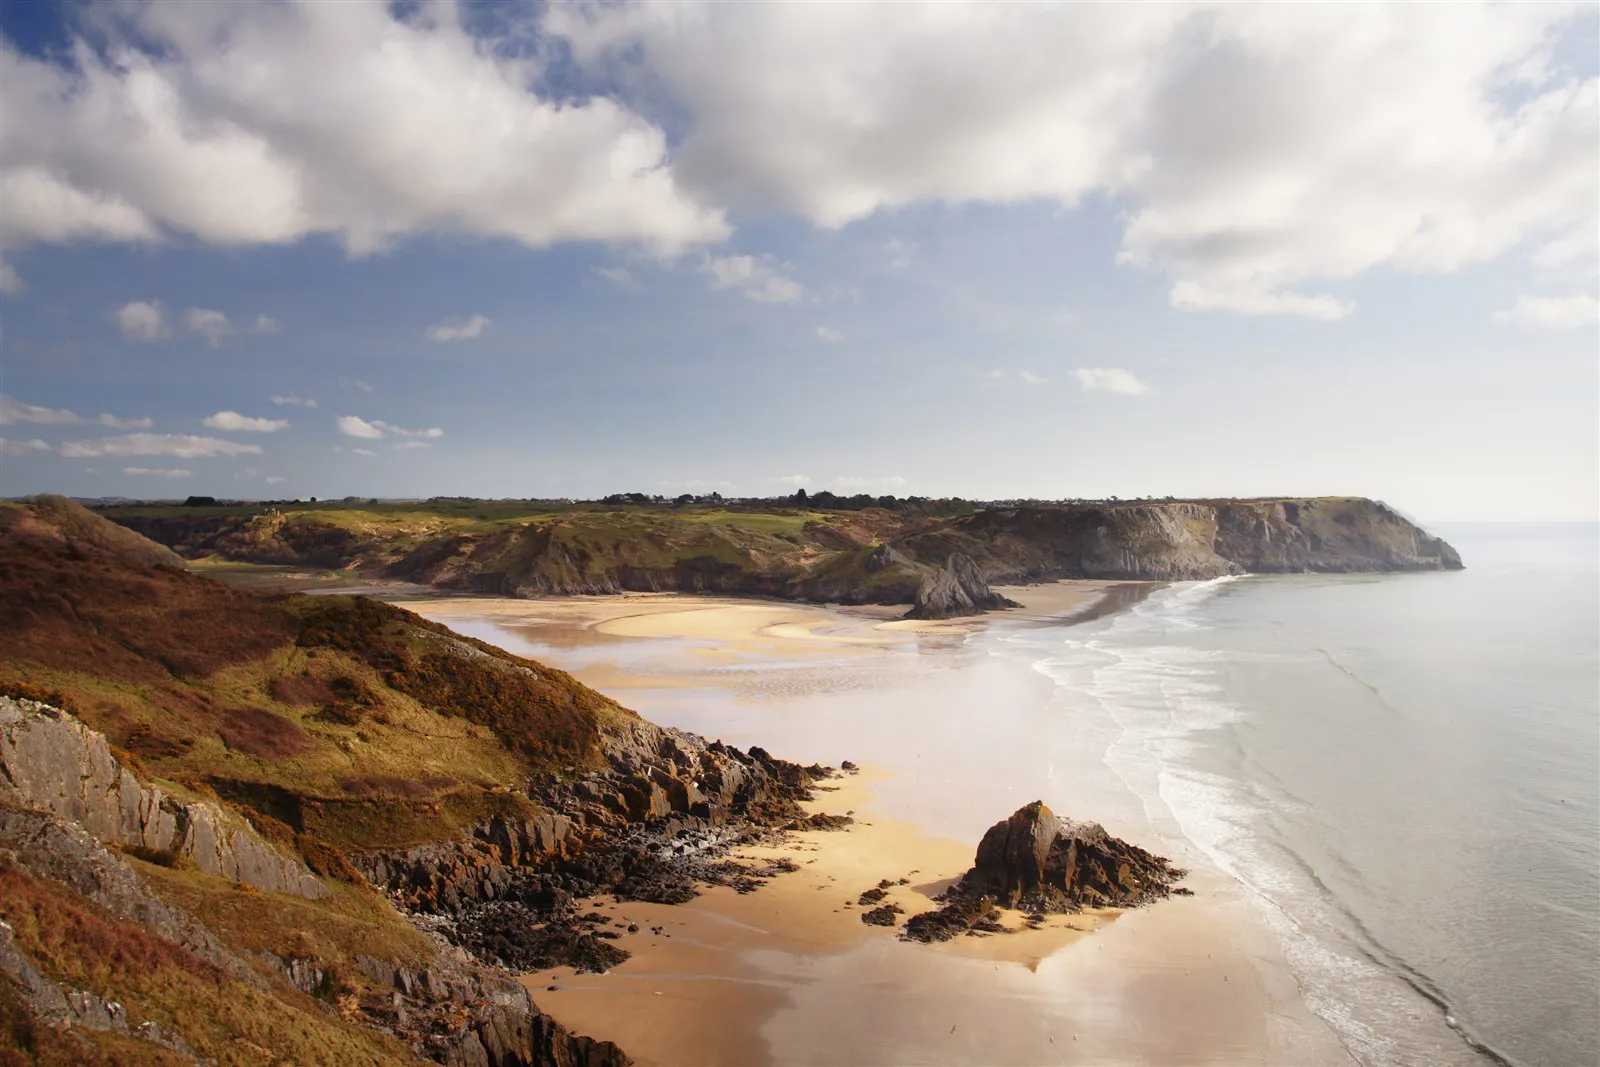 Stunning Three Cliffs Bay in South Wales